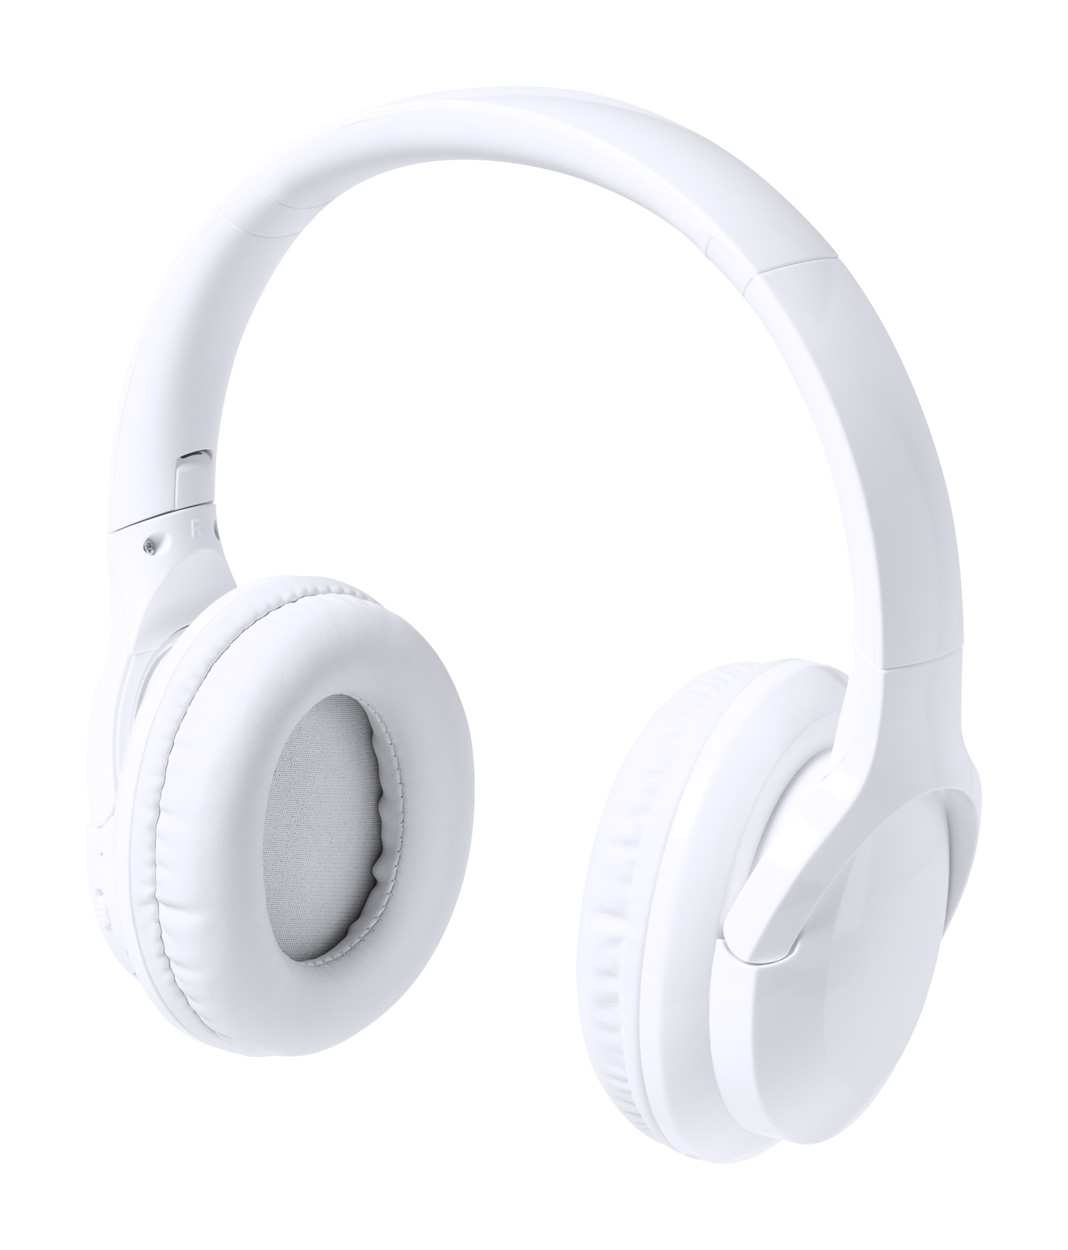 Witums noise canceling headphones - white